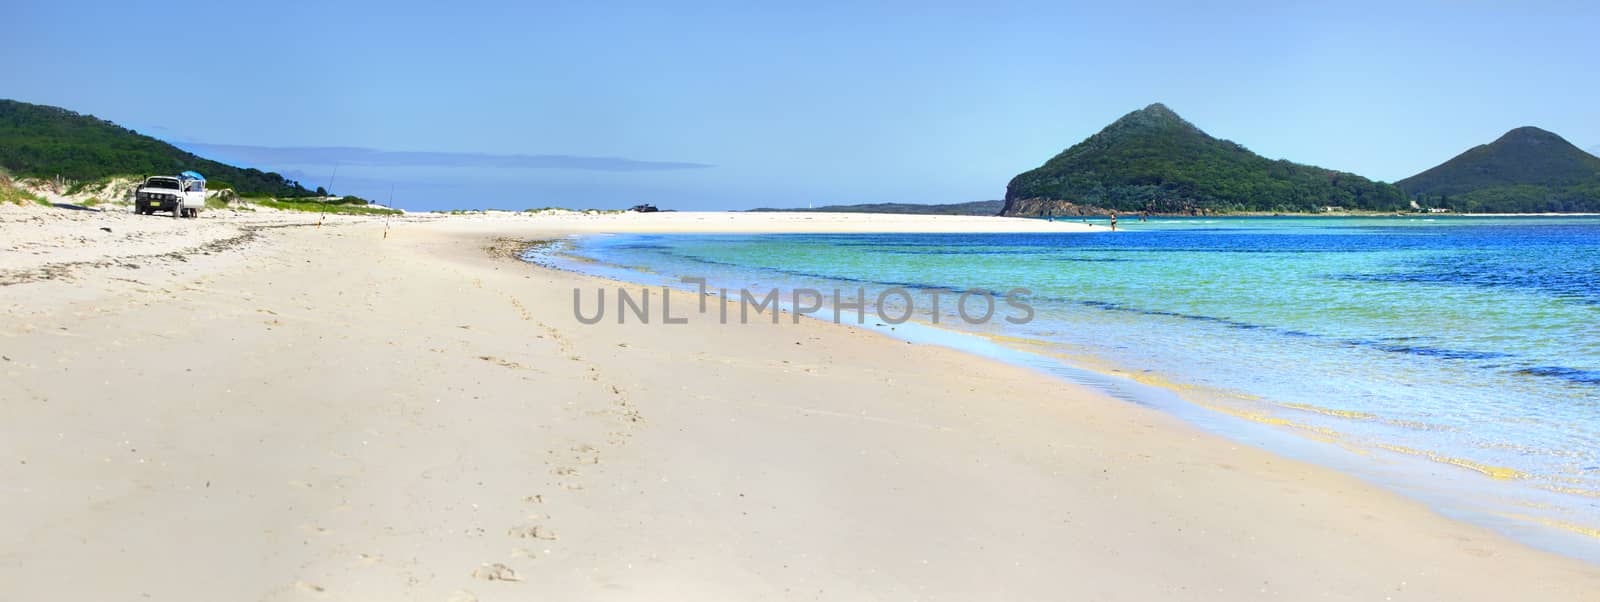 Beautiful blue waters and almost white sands at Jimmys Beach Hawks Nest panorama with Mt Tomaree in view.   A popular place for fishermen and lovely place to swim.